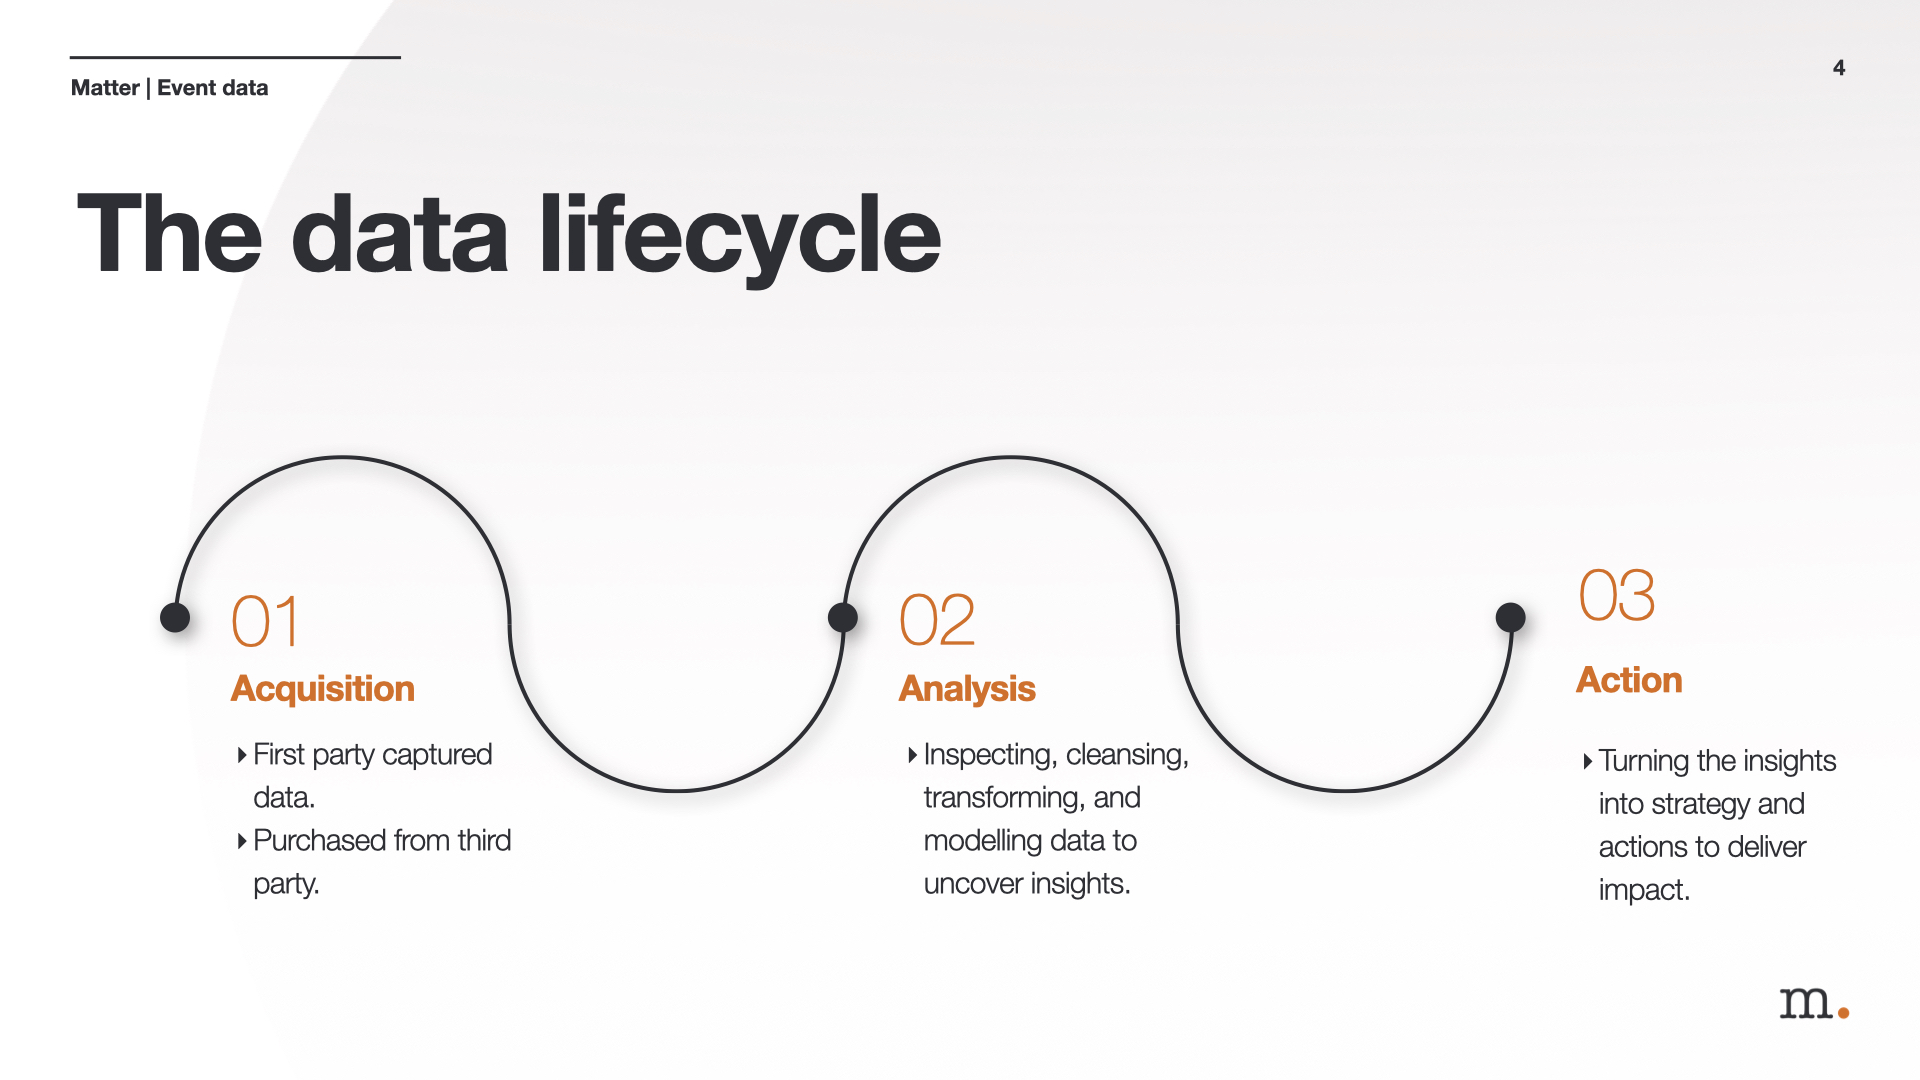 The data lifecycle